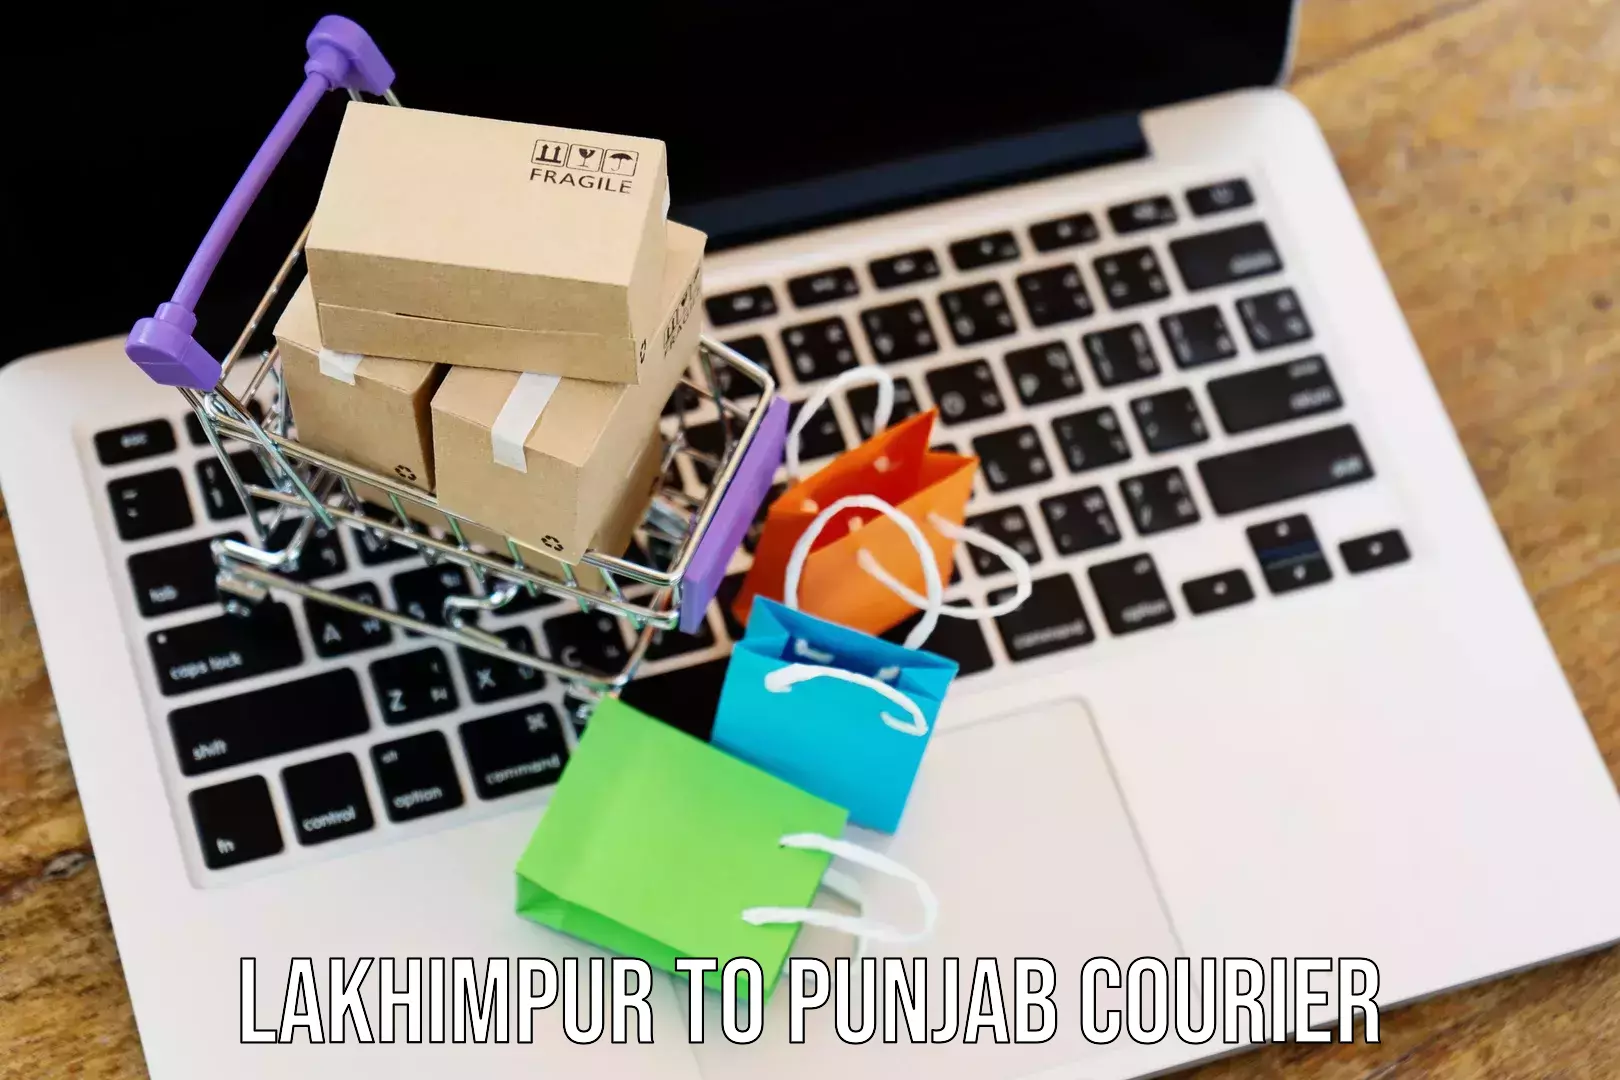 International courier networks Lakhimpur to Punjab Agricultural University Ludhiana